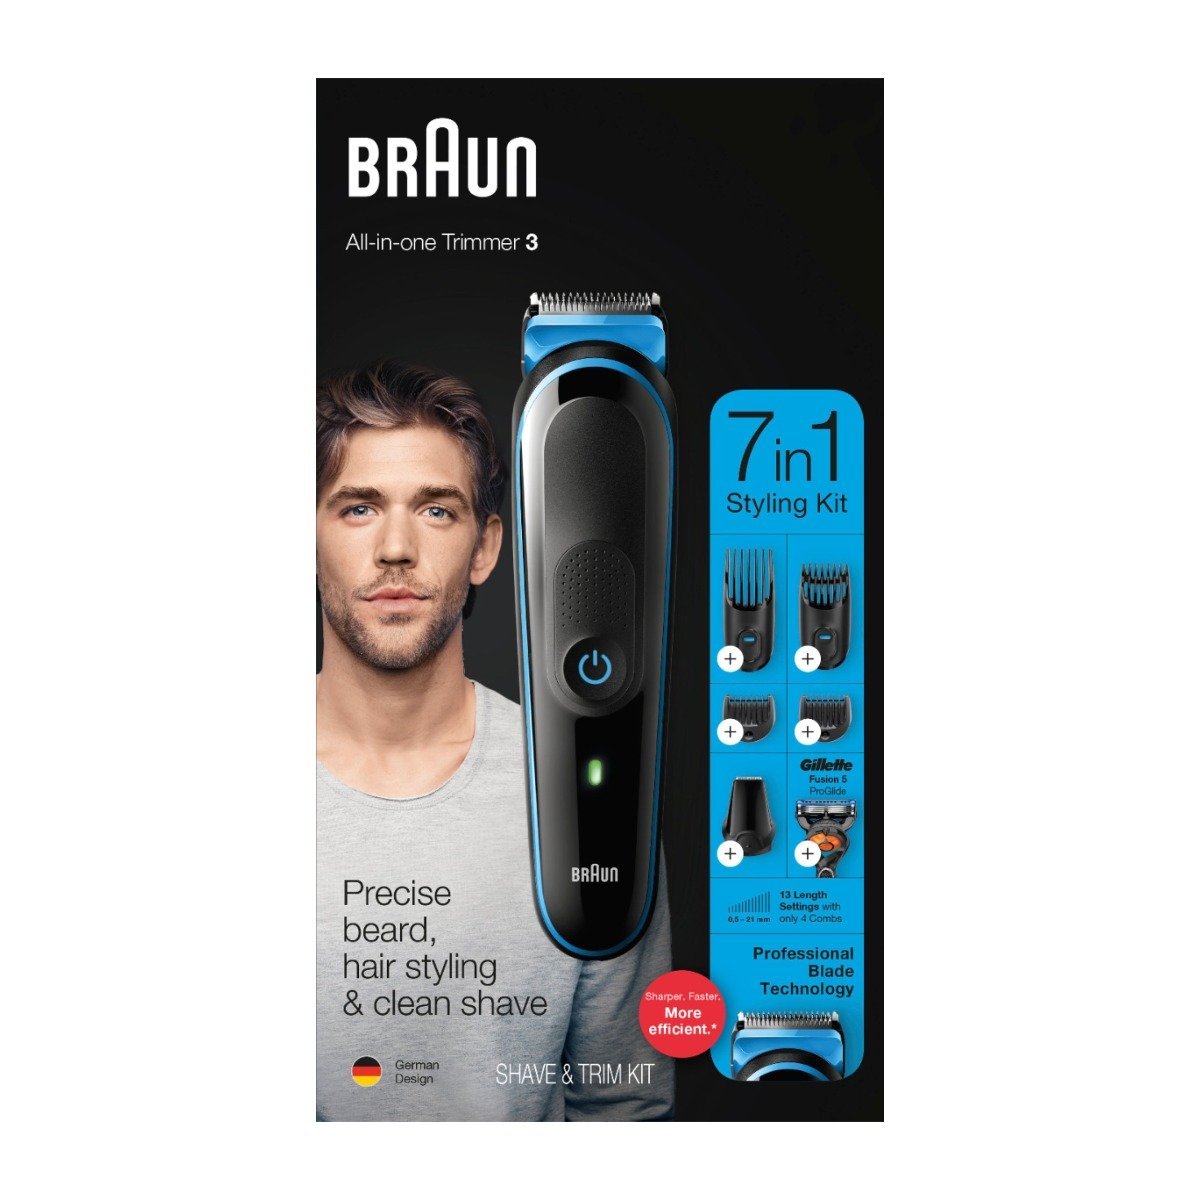 Braun All-In-One Trimmer (3) 7 In 1 Styling Kit - MGK3245 - Bloom Pharmacy